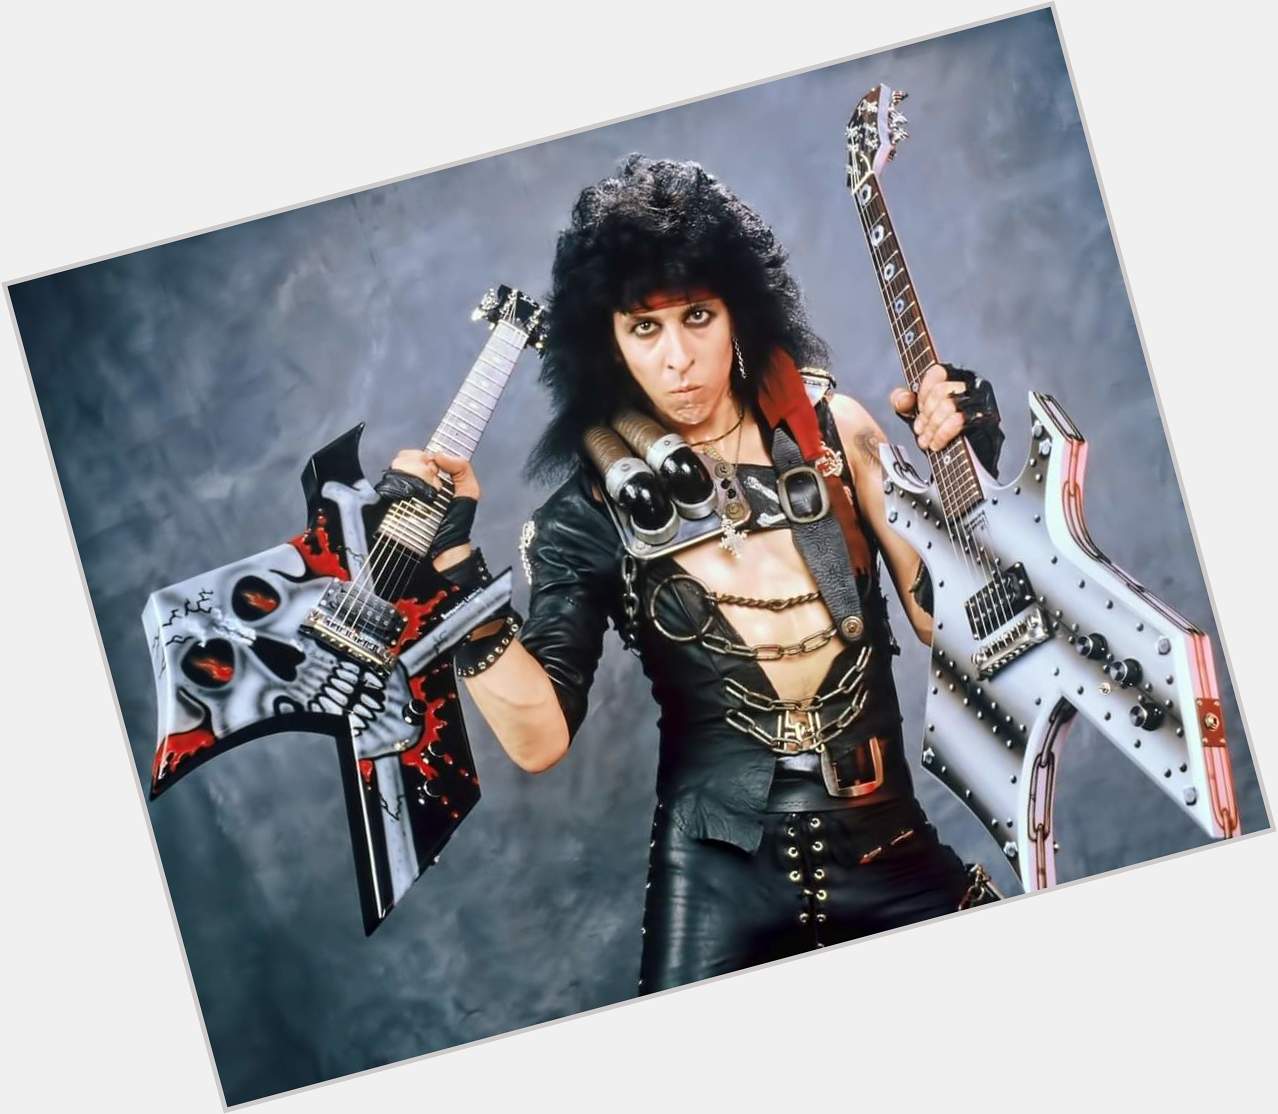 Happy Birthday to Randy Piper, original guitarist and co-founder of W.A.S.P. 